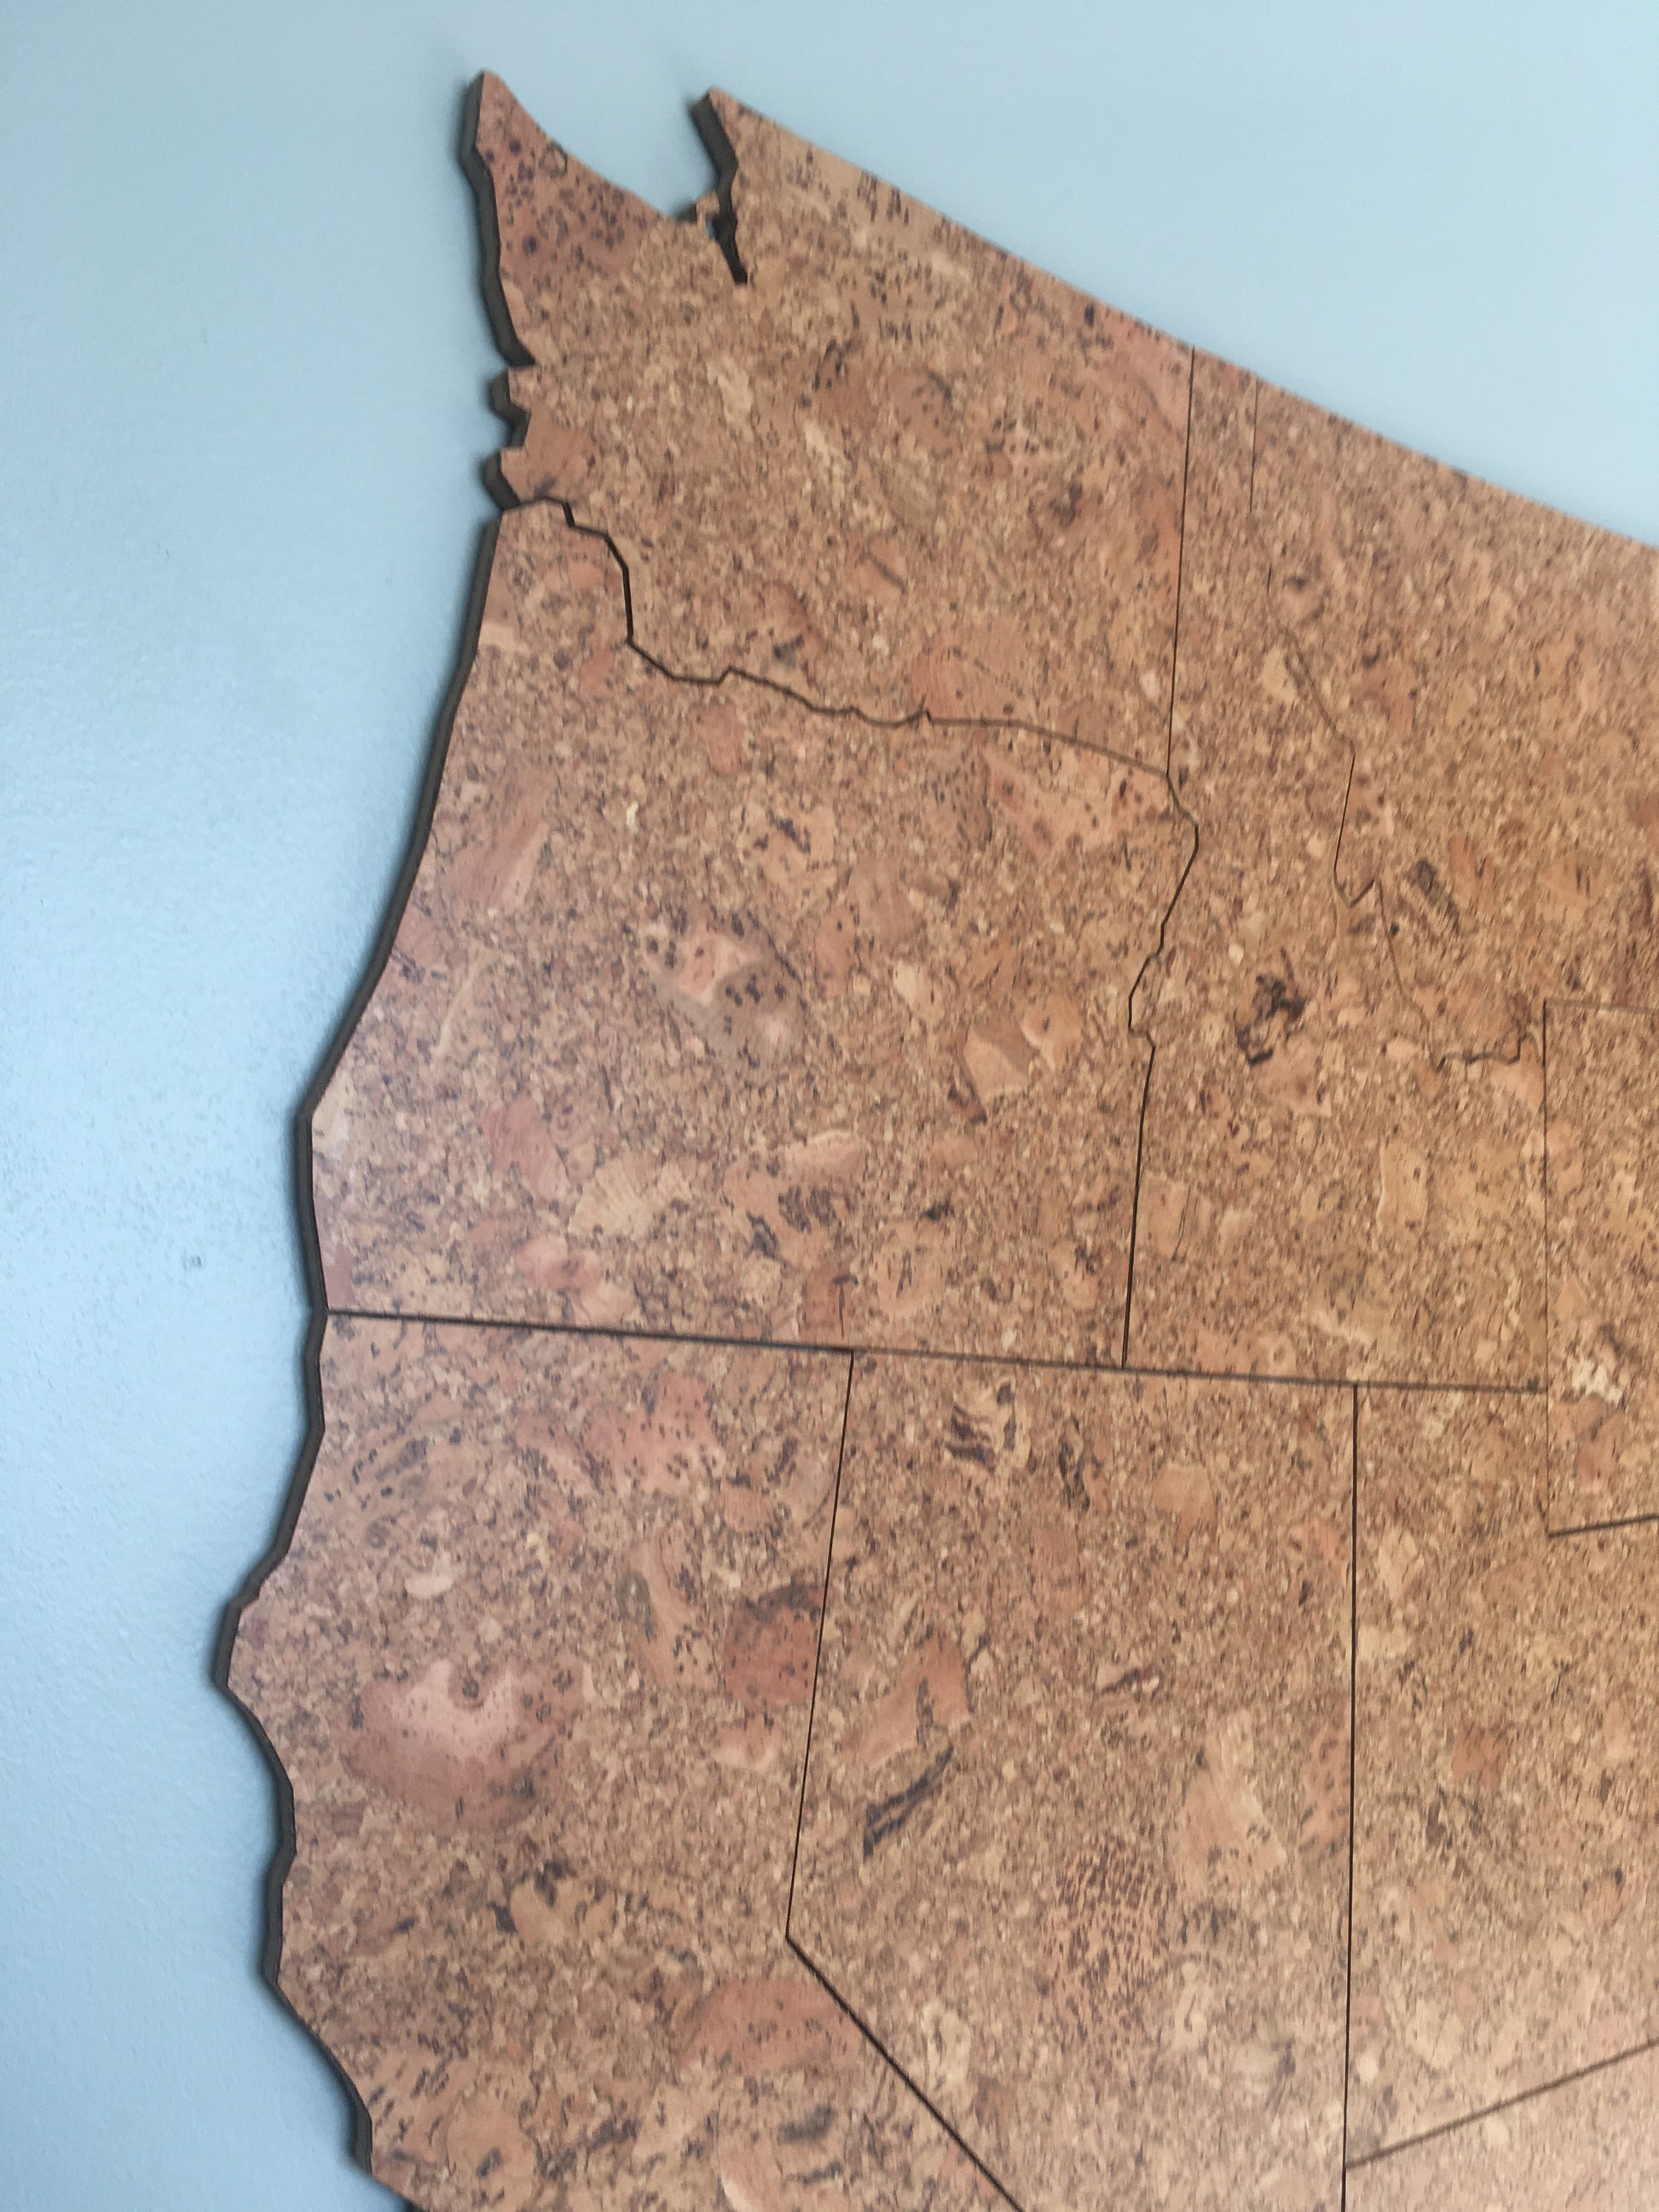 Giant Cork Wall Map of the United States - 8 Foot Wide, Wall Decor - GEO 101 DESIGN